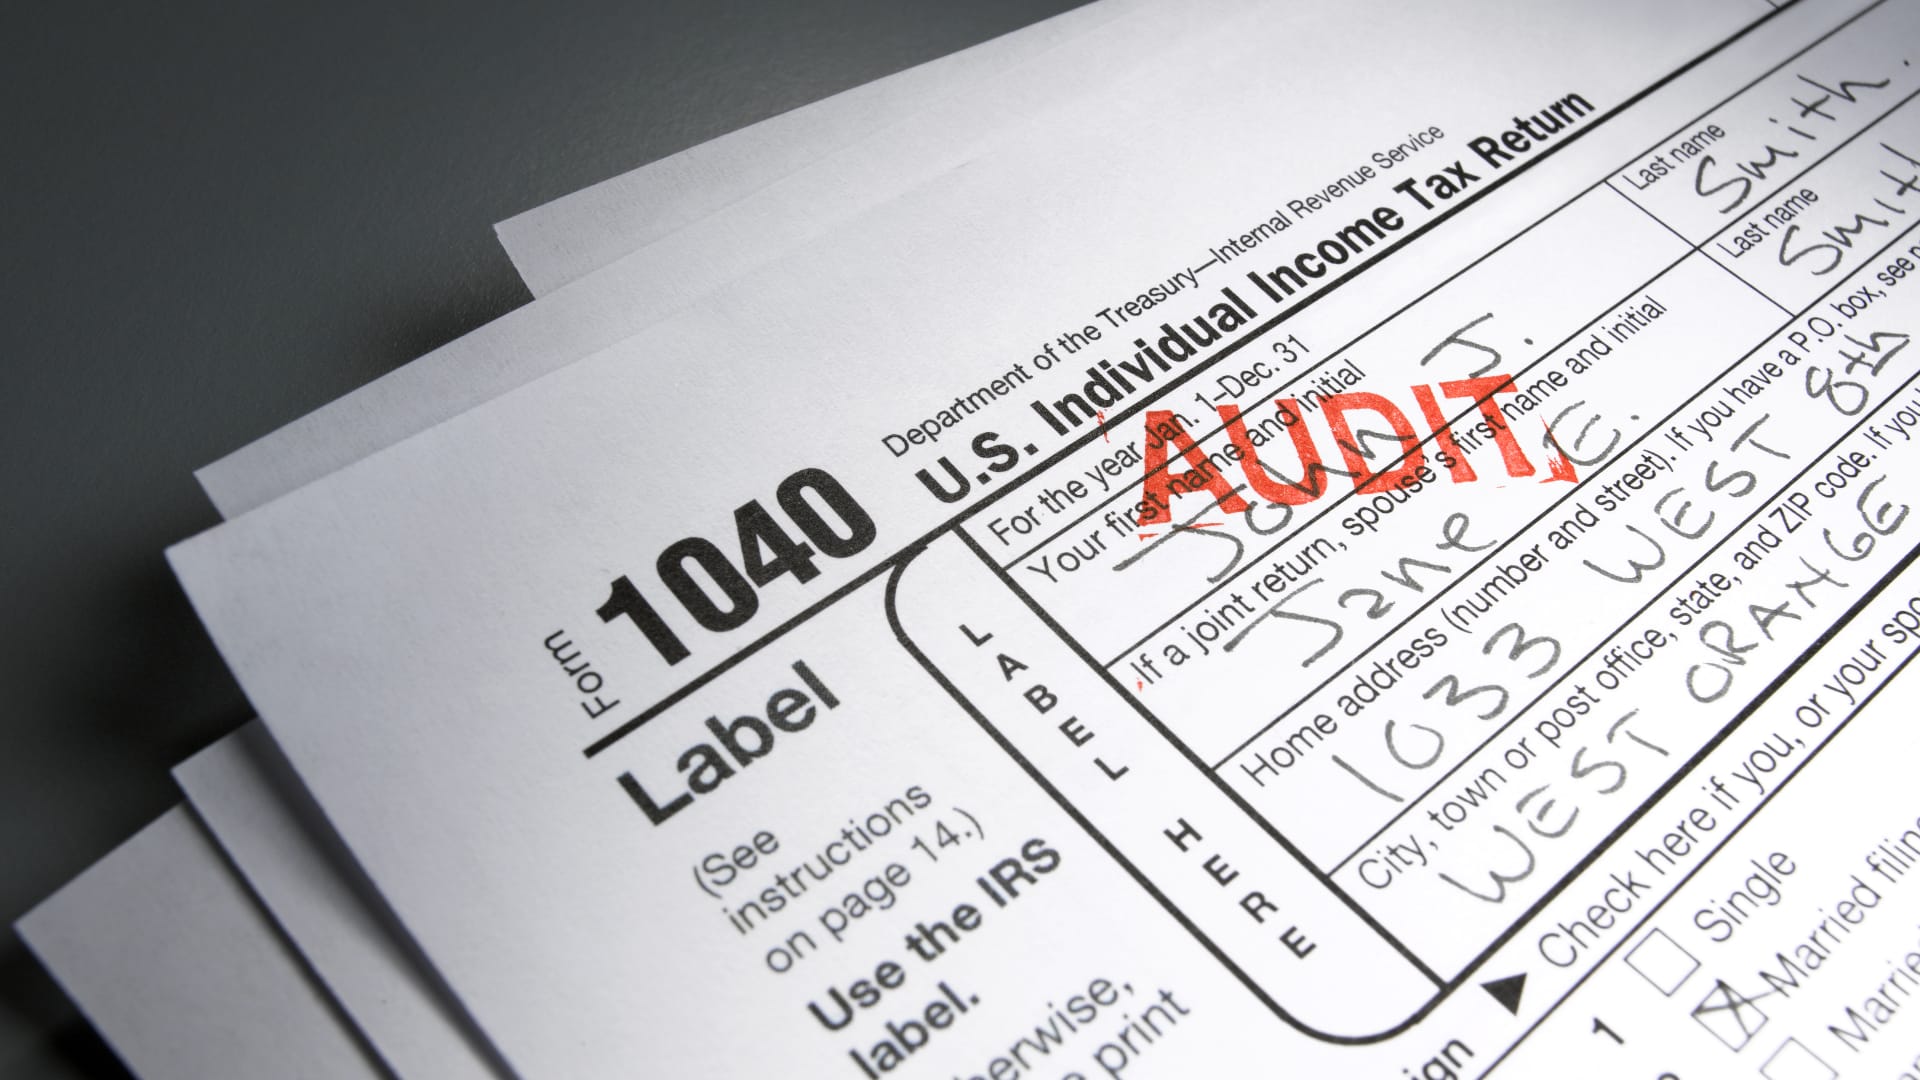 With 87,000 new agents, here’s who the IRS may target for audits